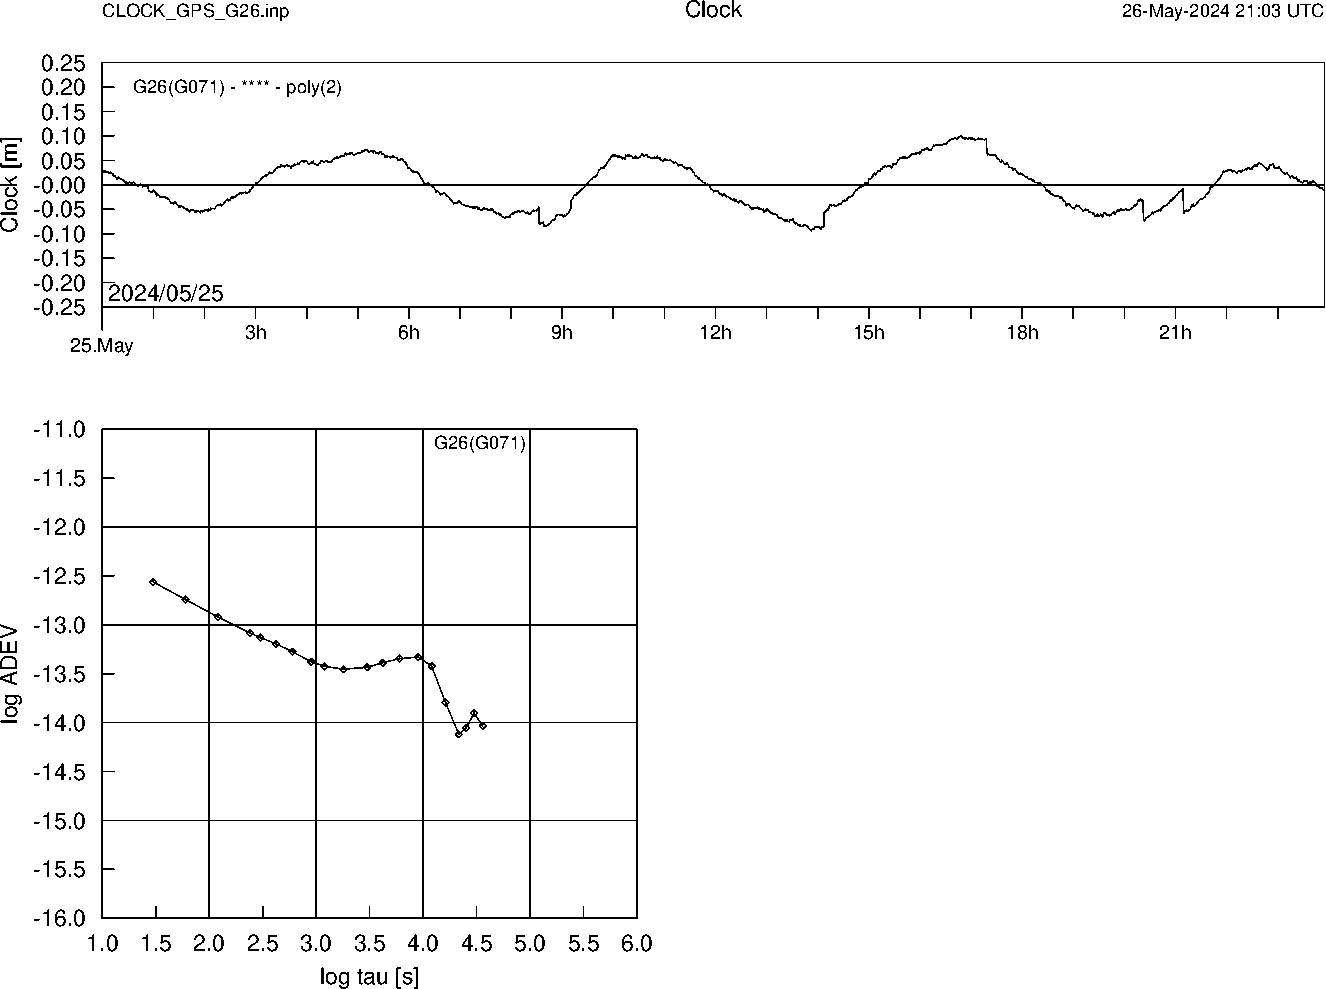 GPS G26 Clock Time Series and Allan Deviation